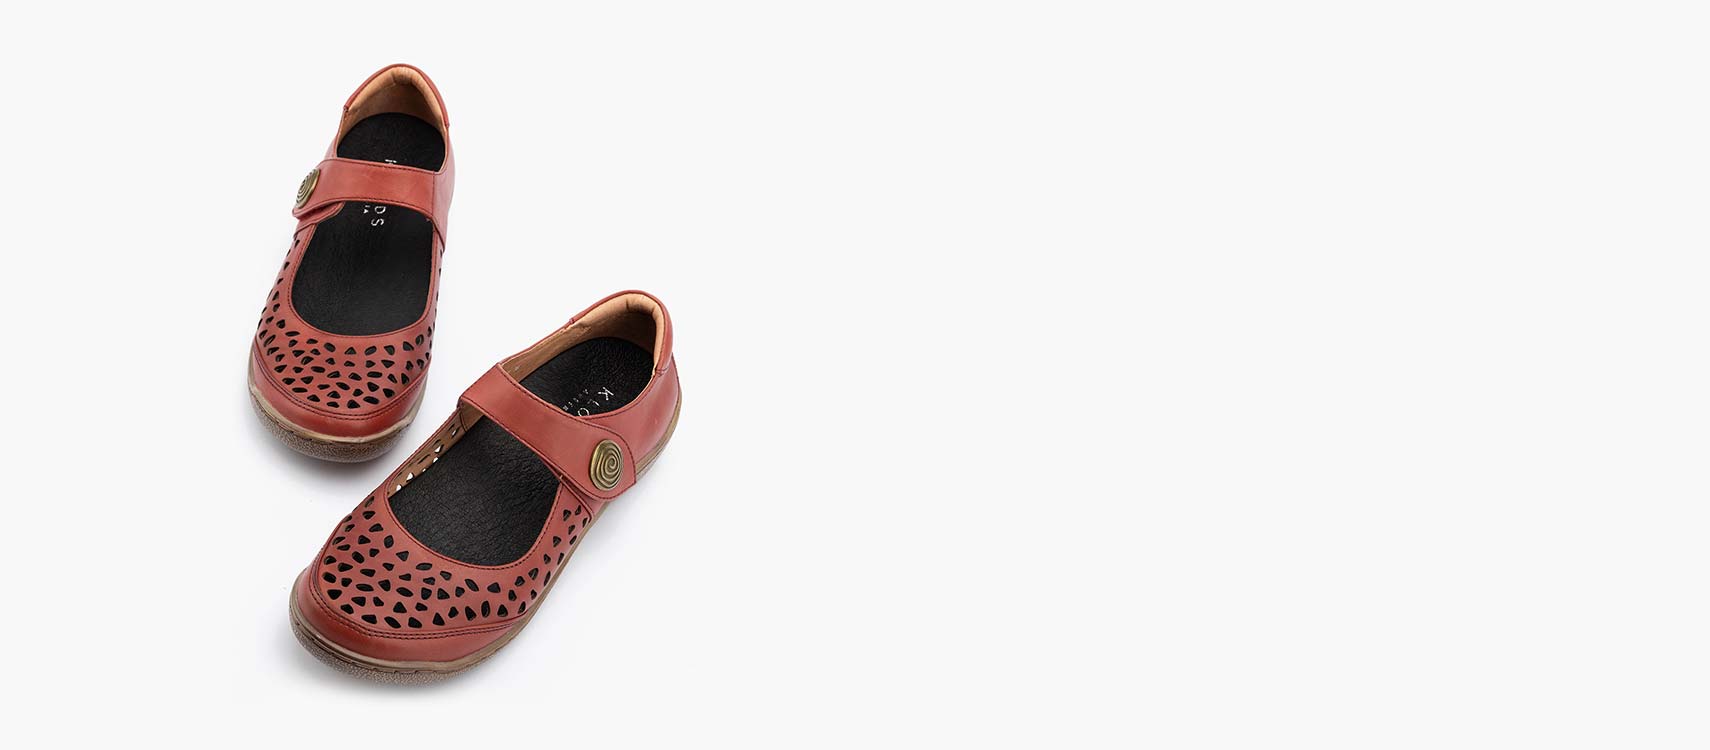 women's mary jane shoes sale